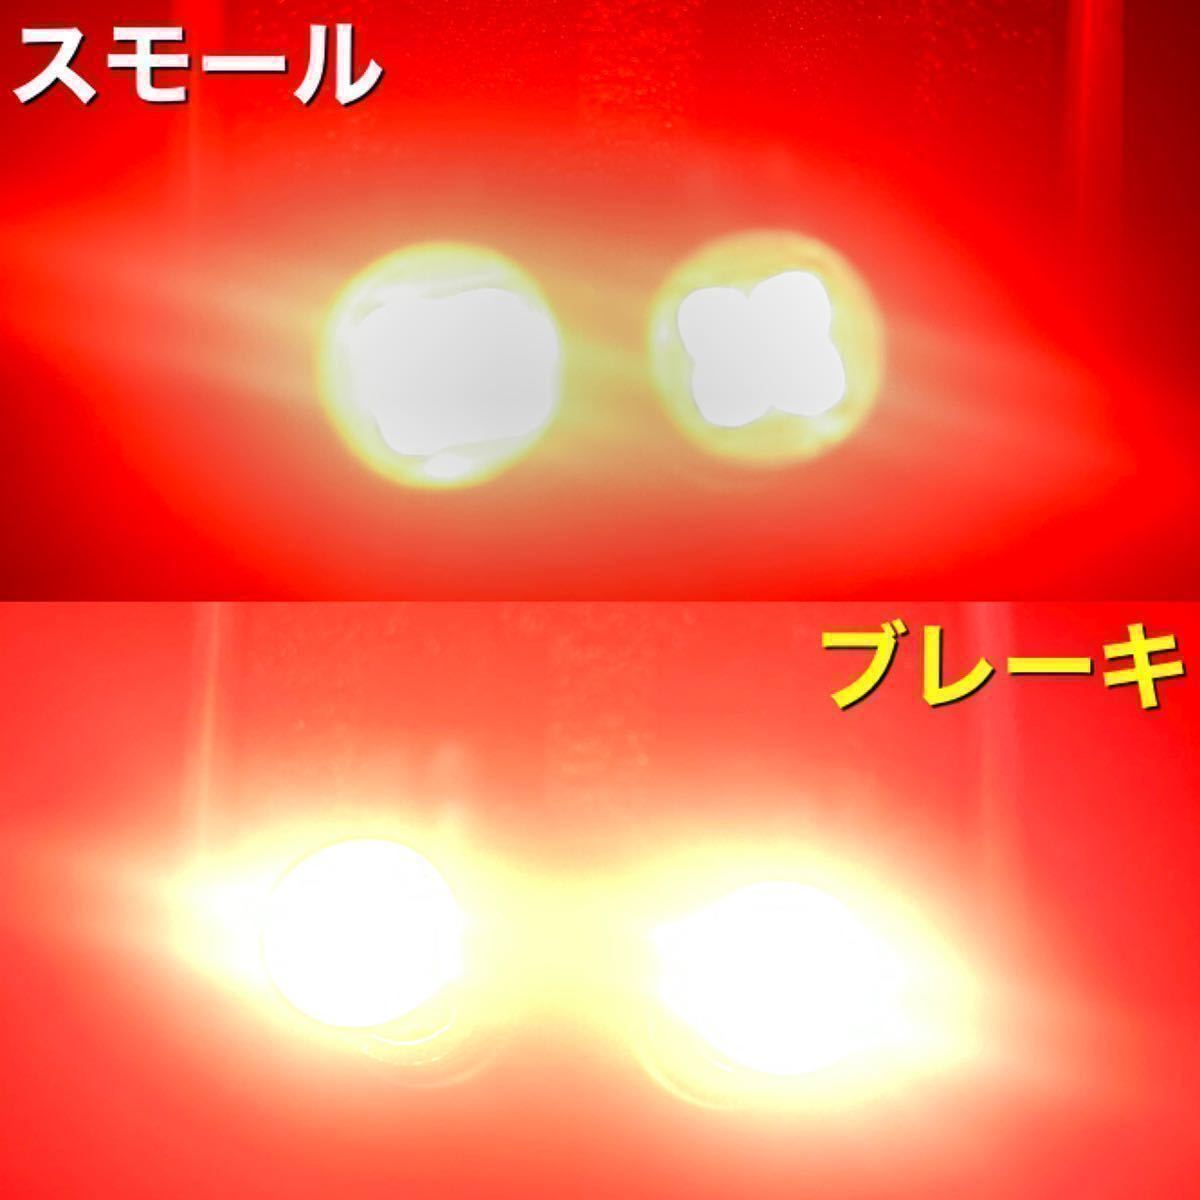 led S25 段違い　ダブルソケット　3030 12smd canbus エラーキャンセラー付き　高輝度 超爆裂　赤　RED 2個　カスタマイズソケット、_画像7